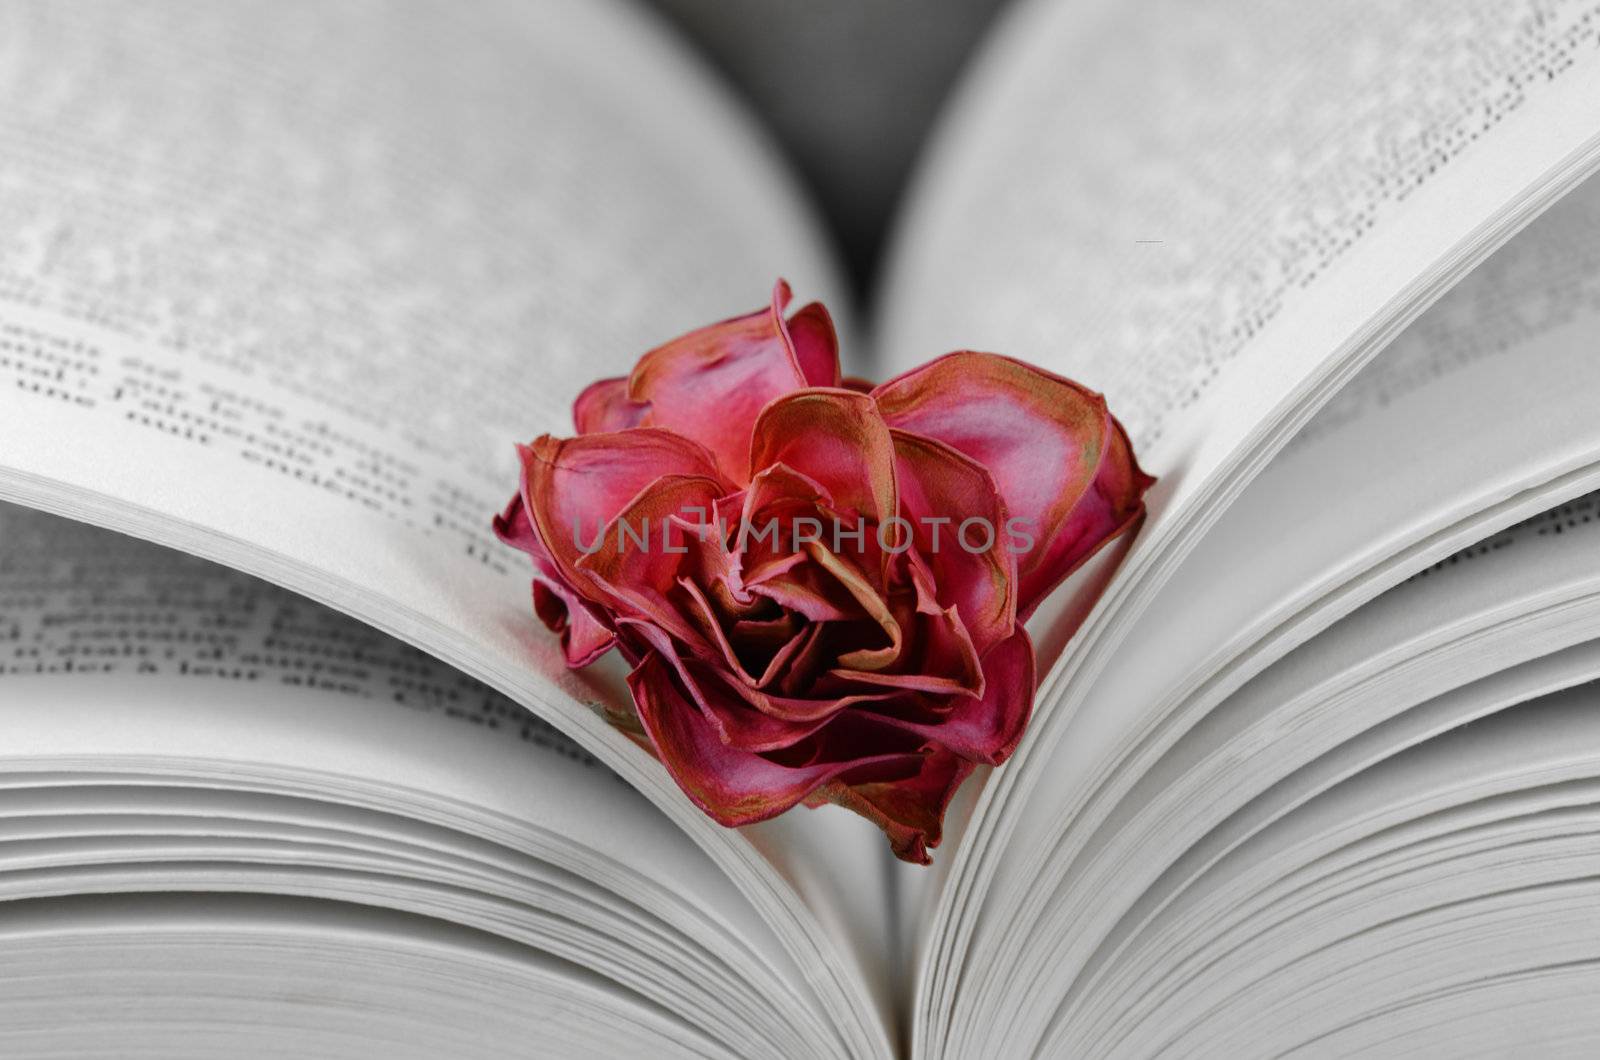 a faded rose between the pages of a book